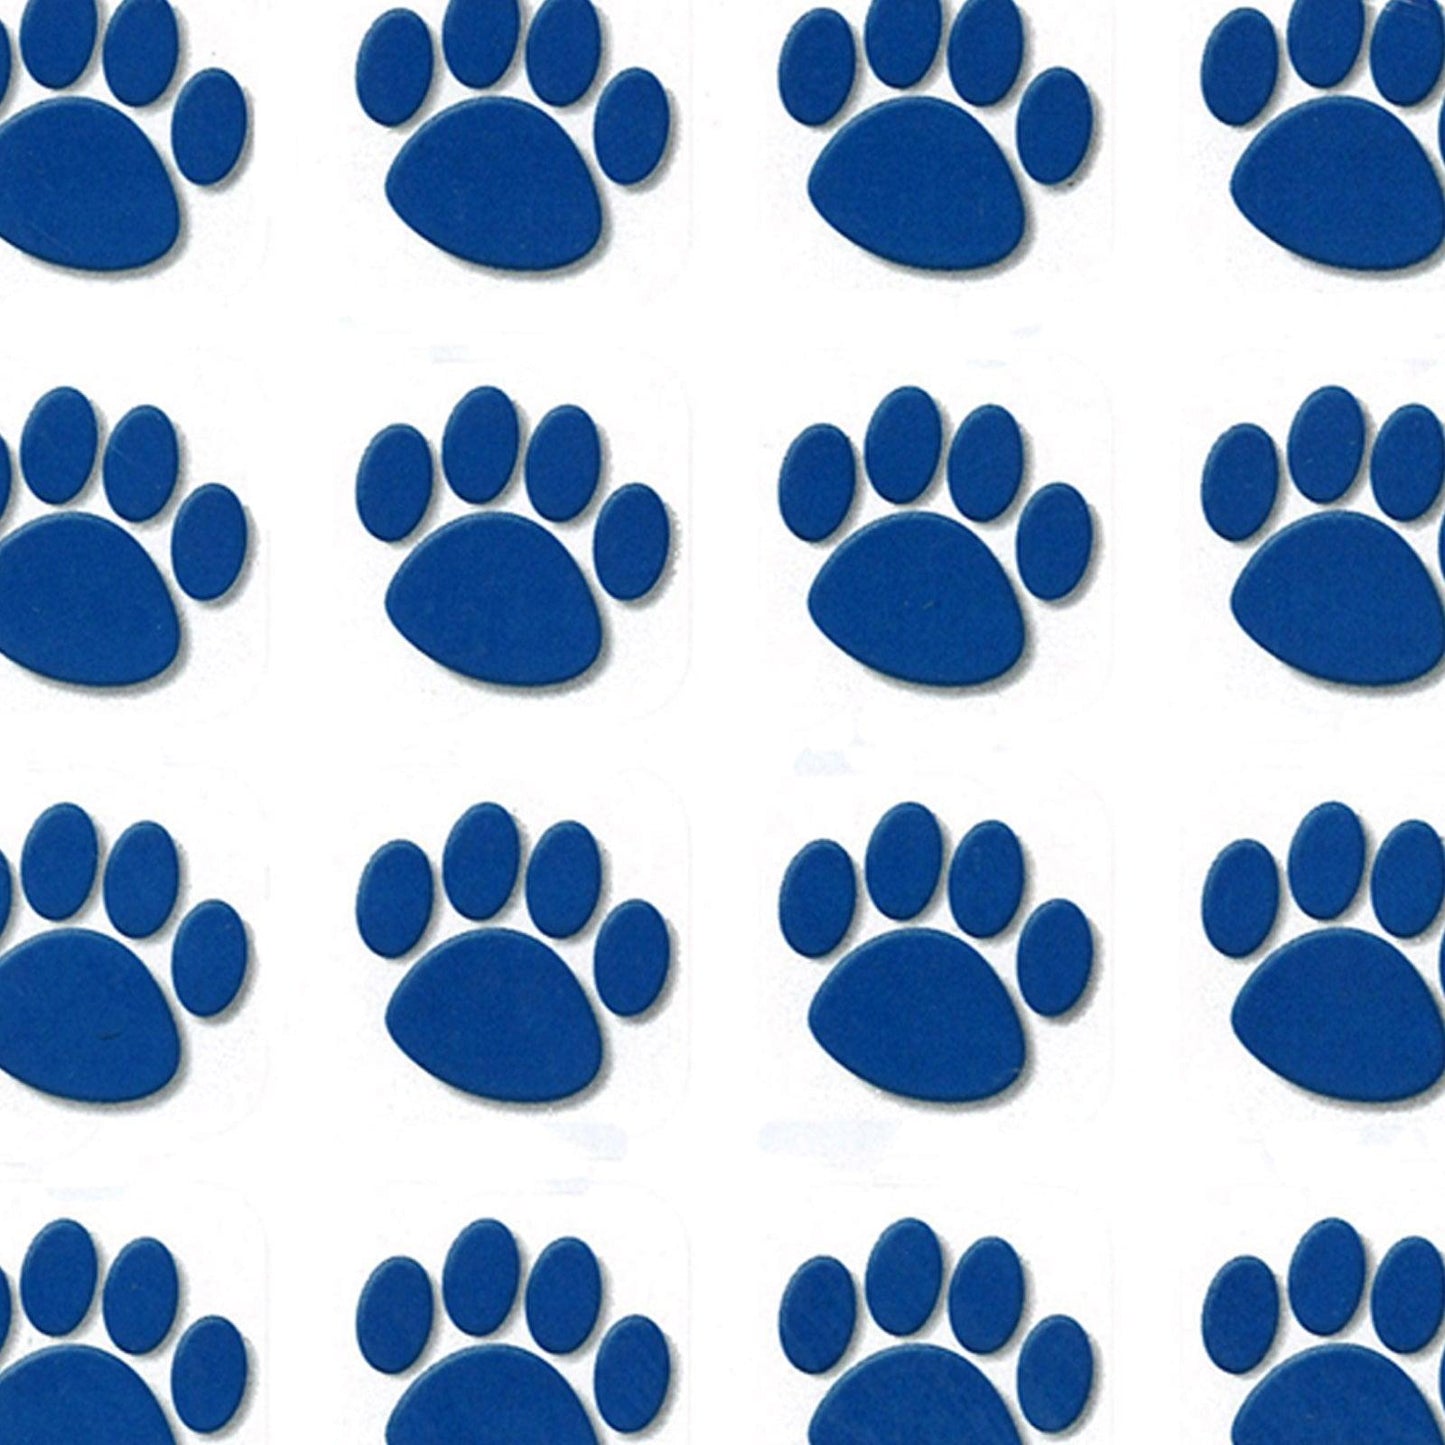 Blue Paw Prints Stickers, 1" Square, 120 Per Pack, 12 Packs - Loomini